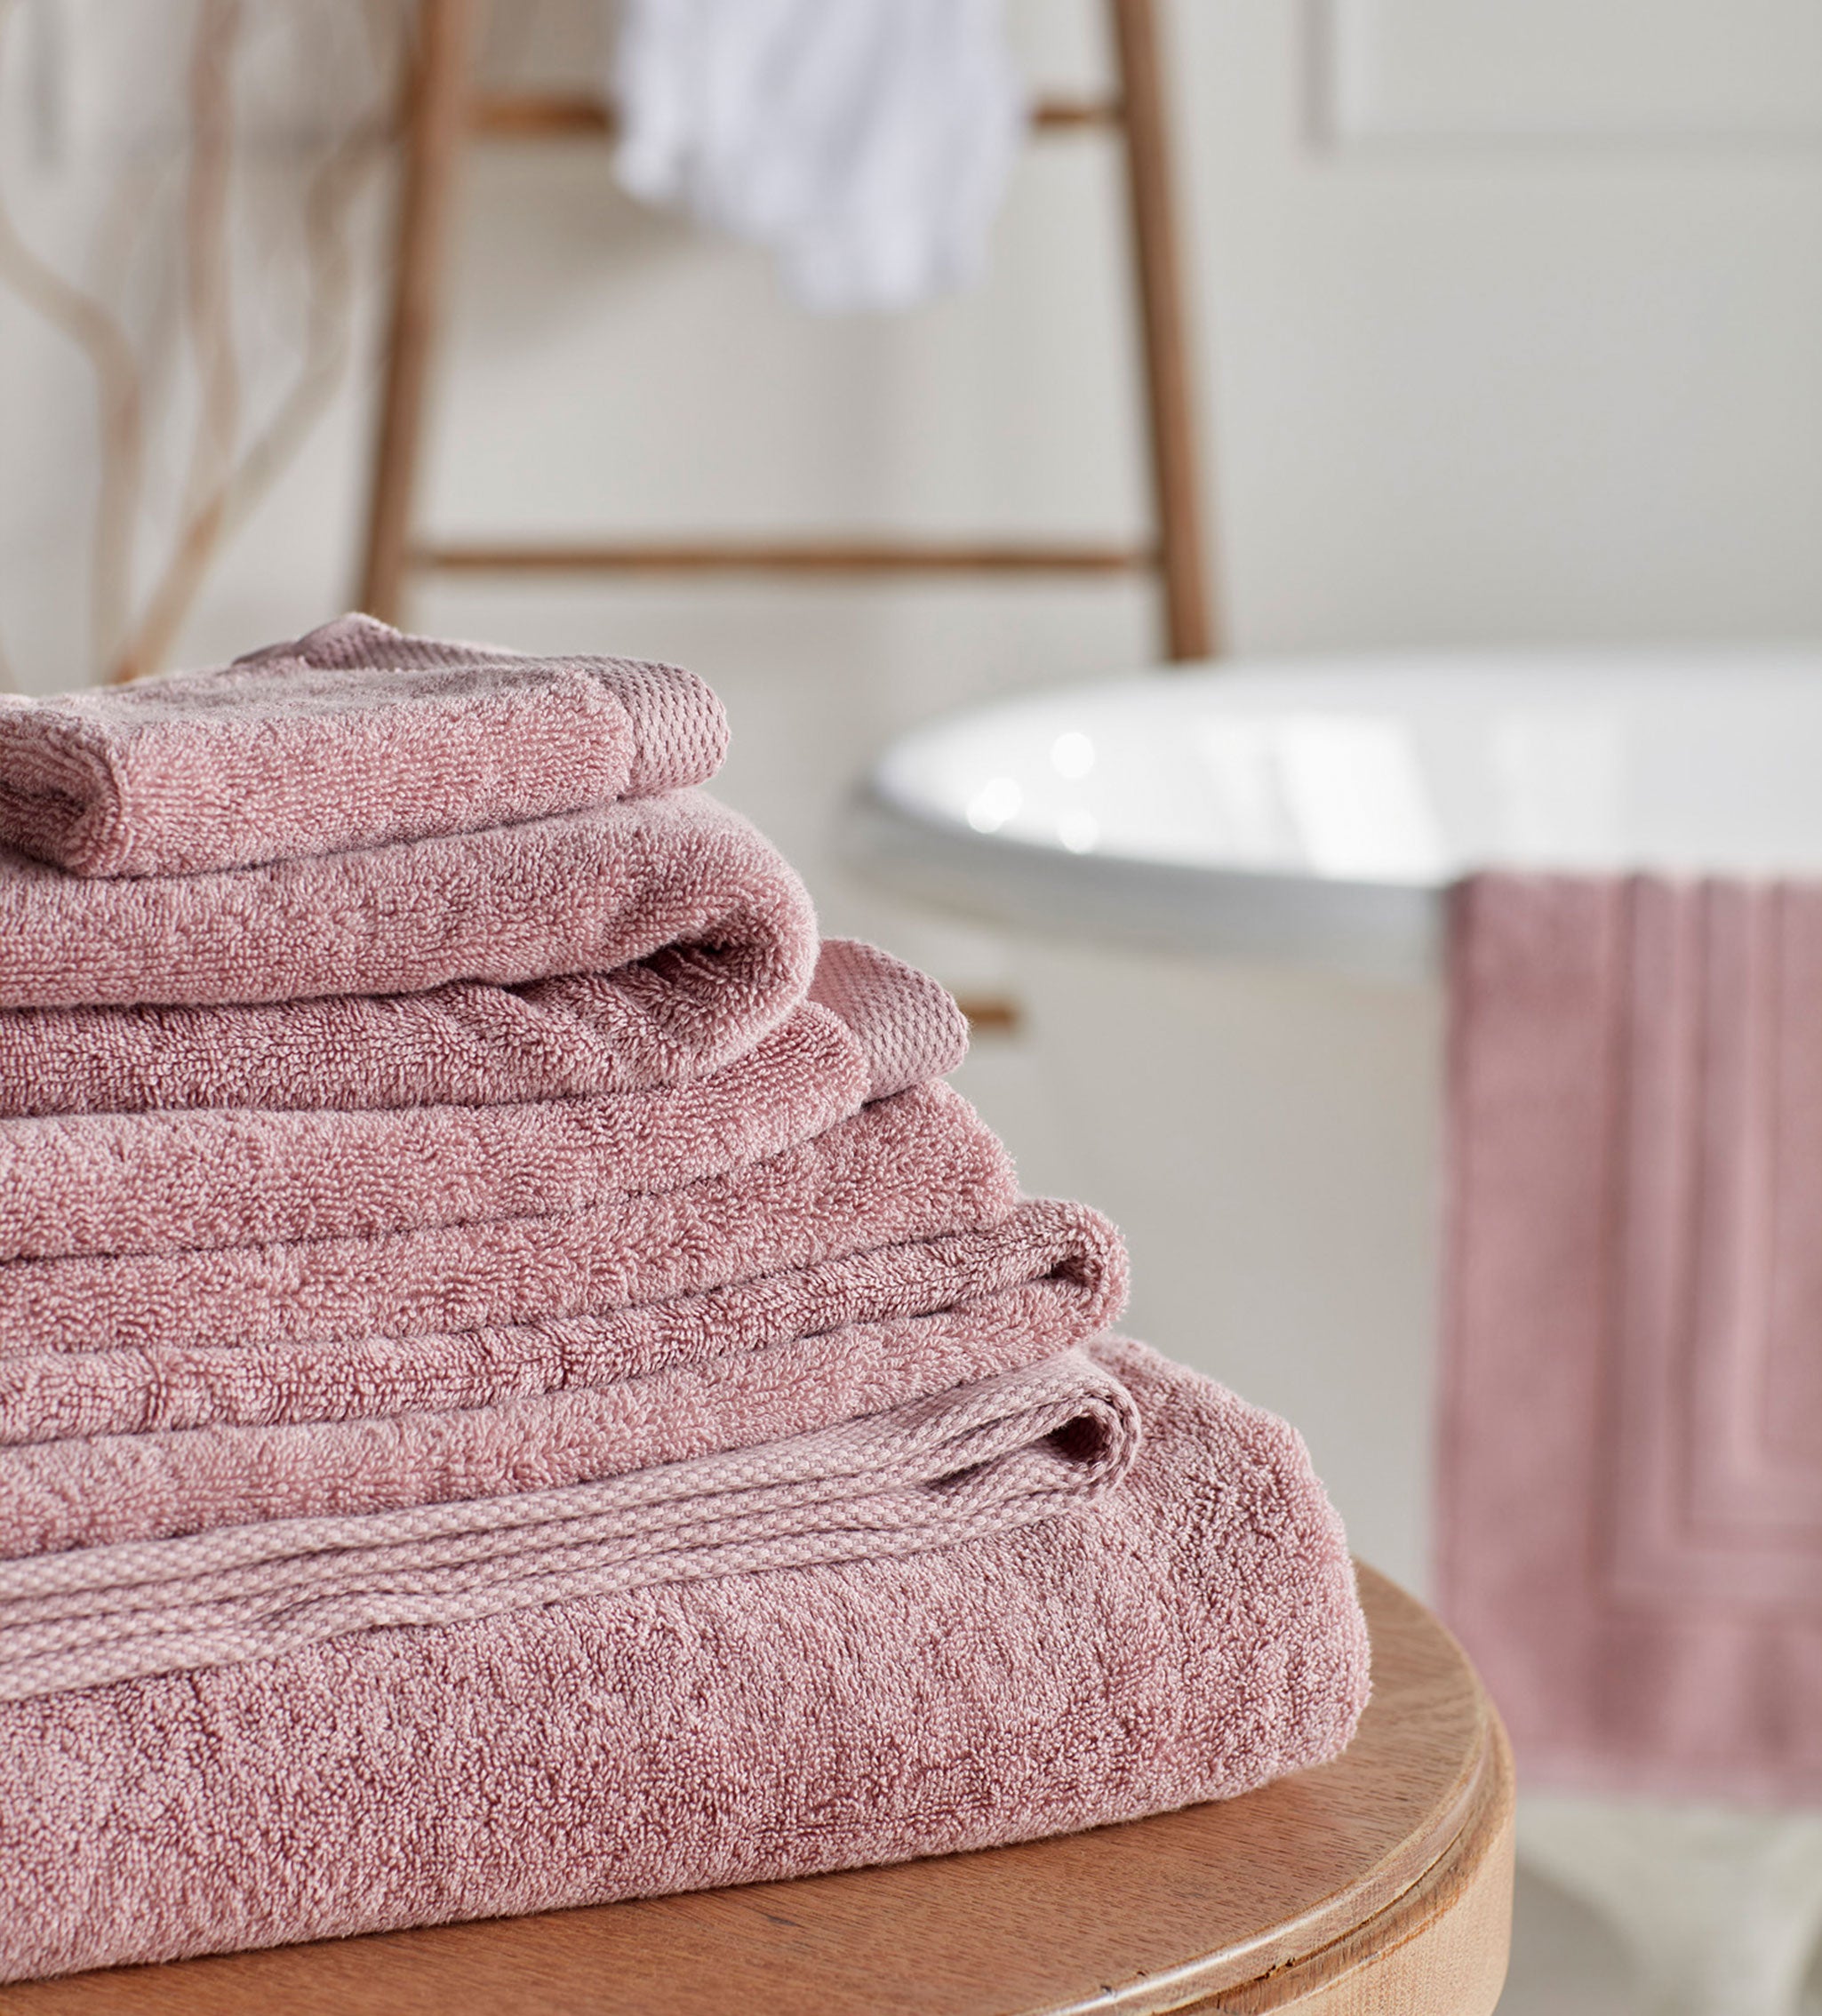 https://cdn.shopify.com/s/files/1/0651/2712/1113/products/VINTAGE-ROSE-LUXURY-TOWELS.jpg